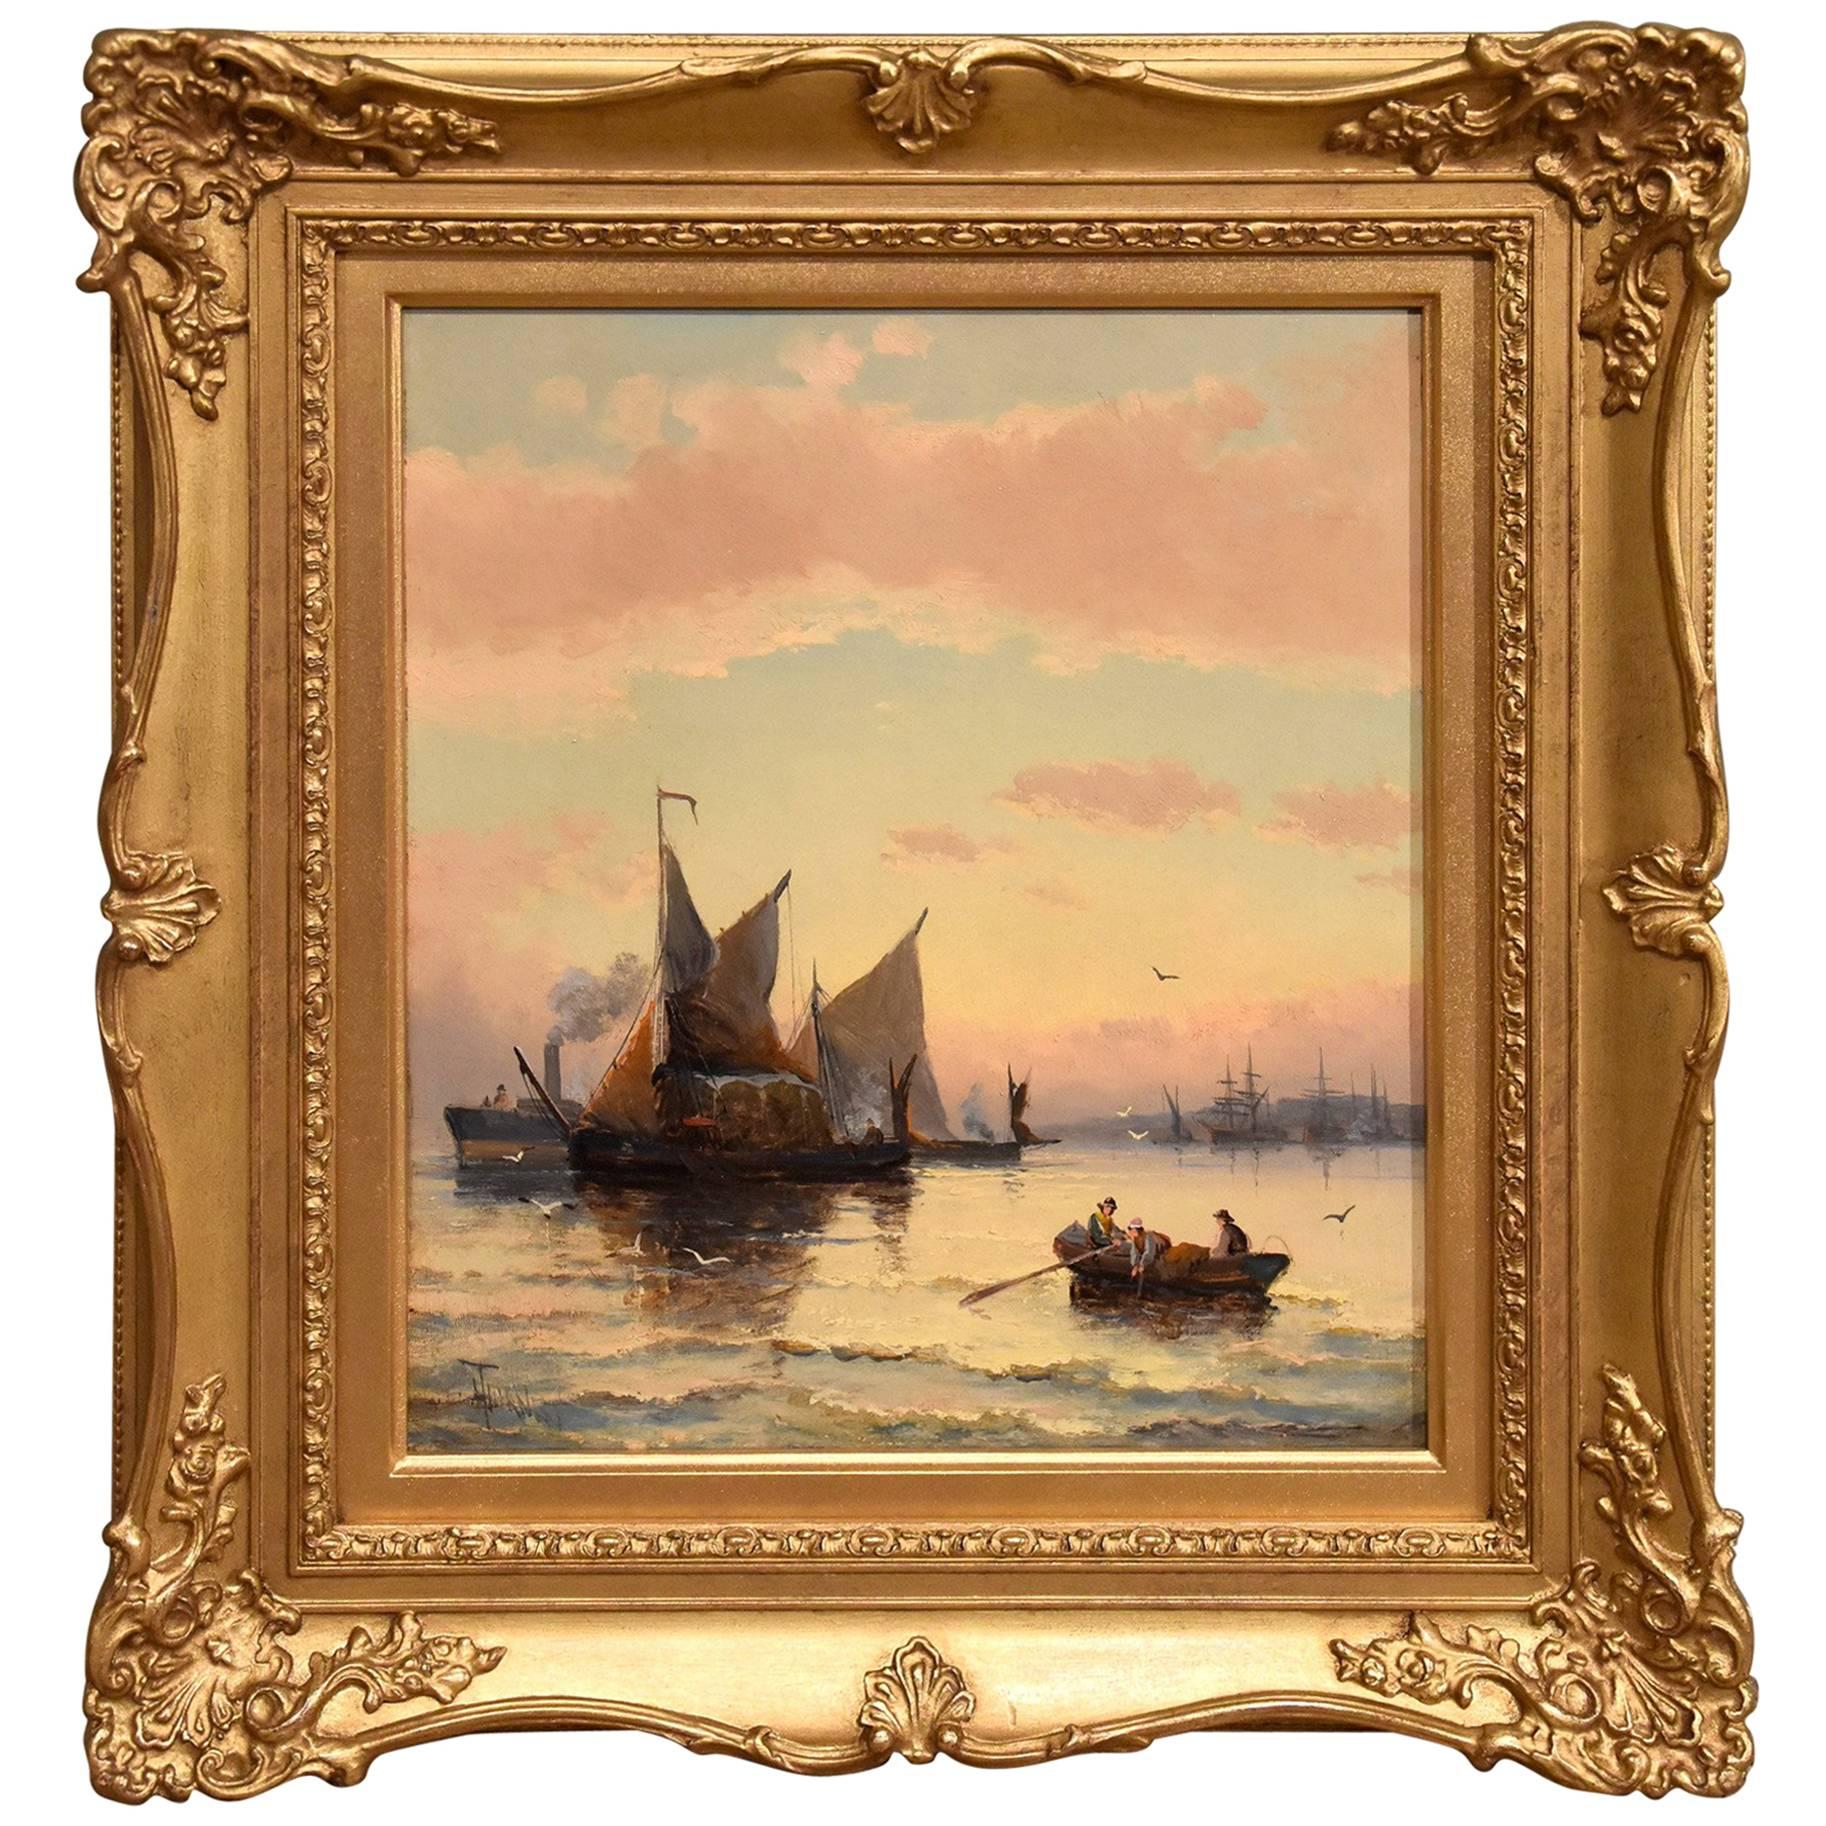 "Evening on the Thames" by William Thornley